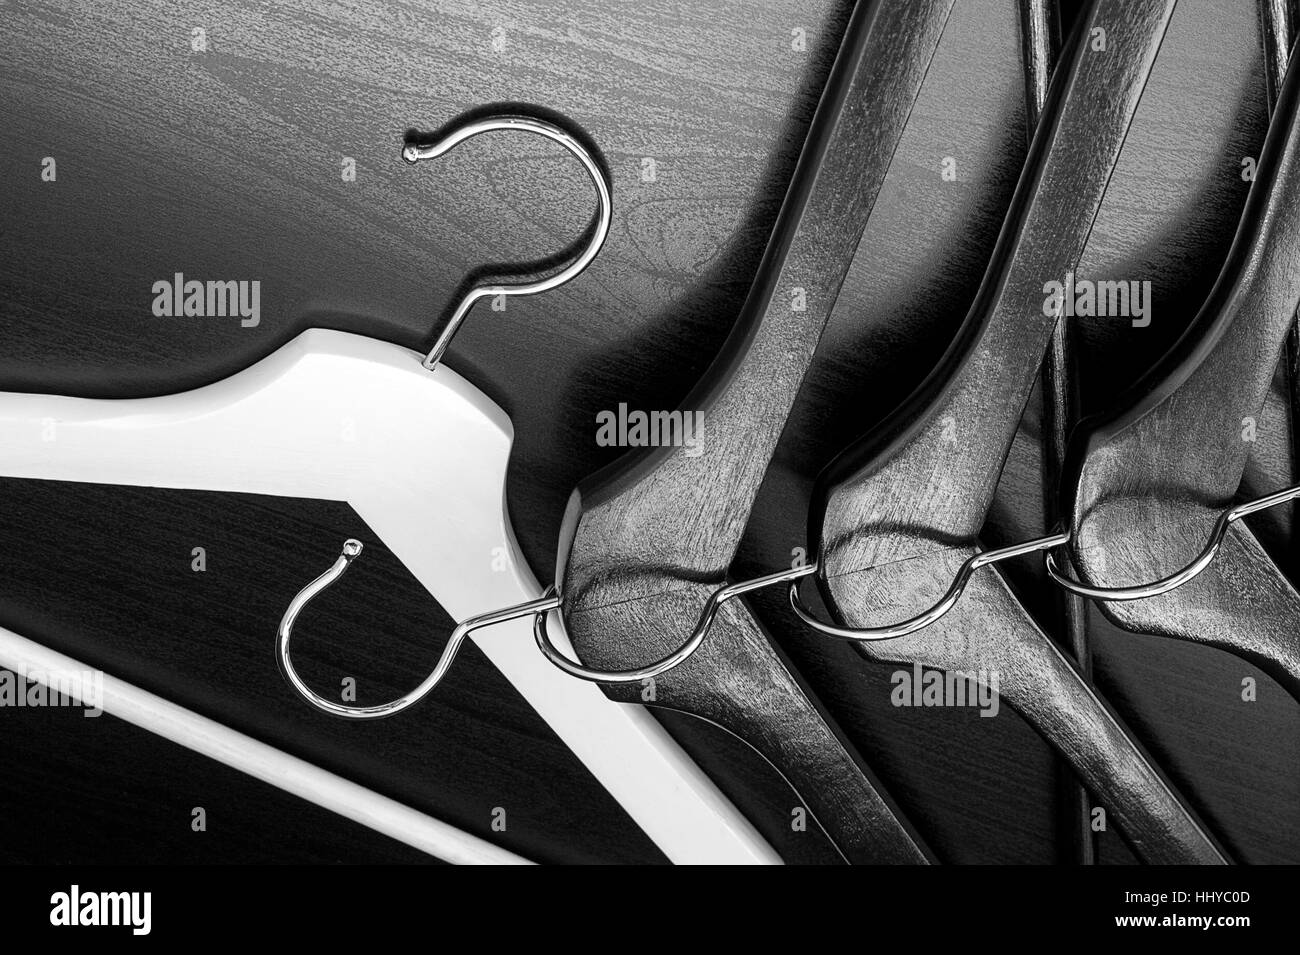 White hanger and a few black hangers, black background, abstract Stock Photo